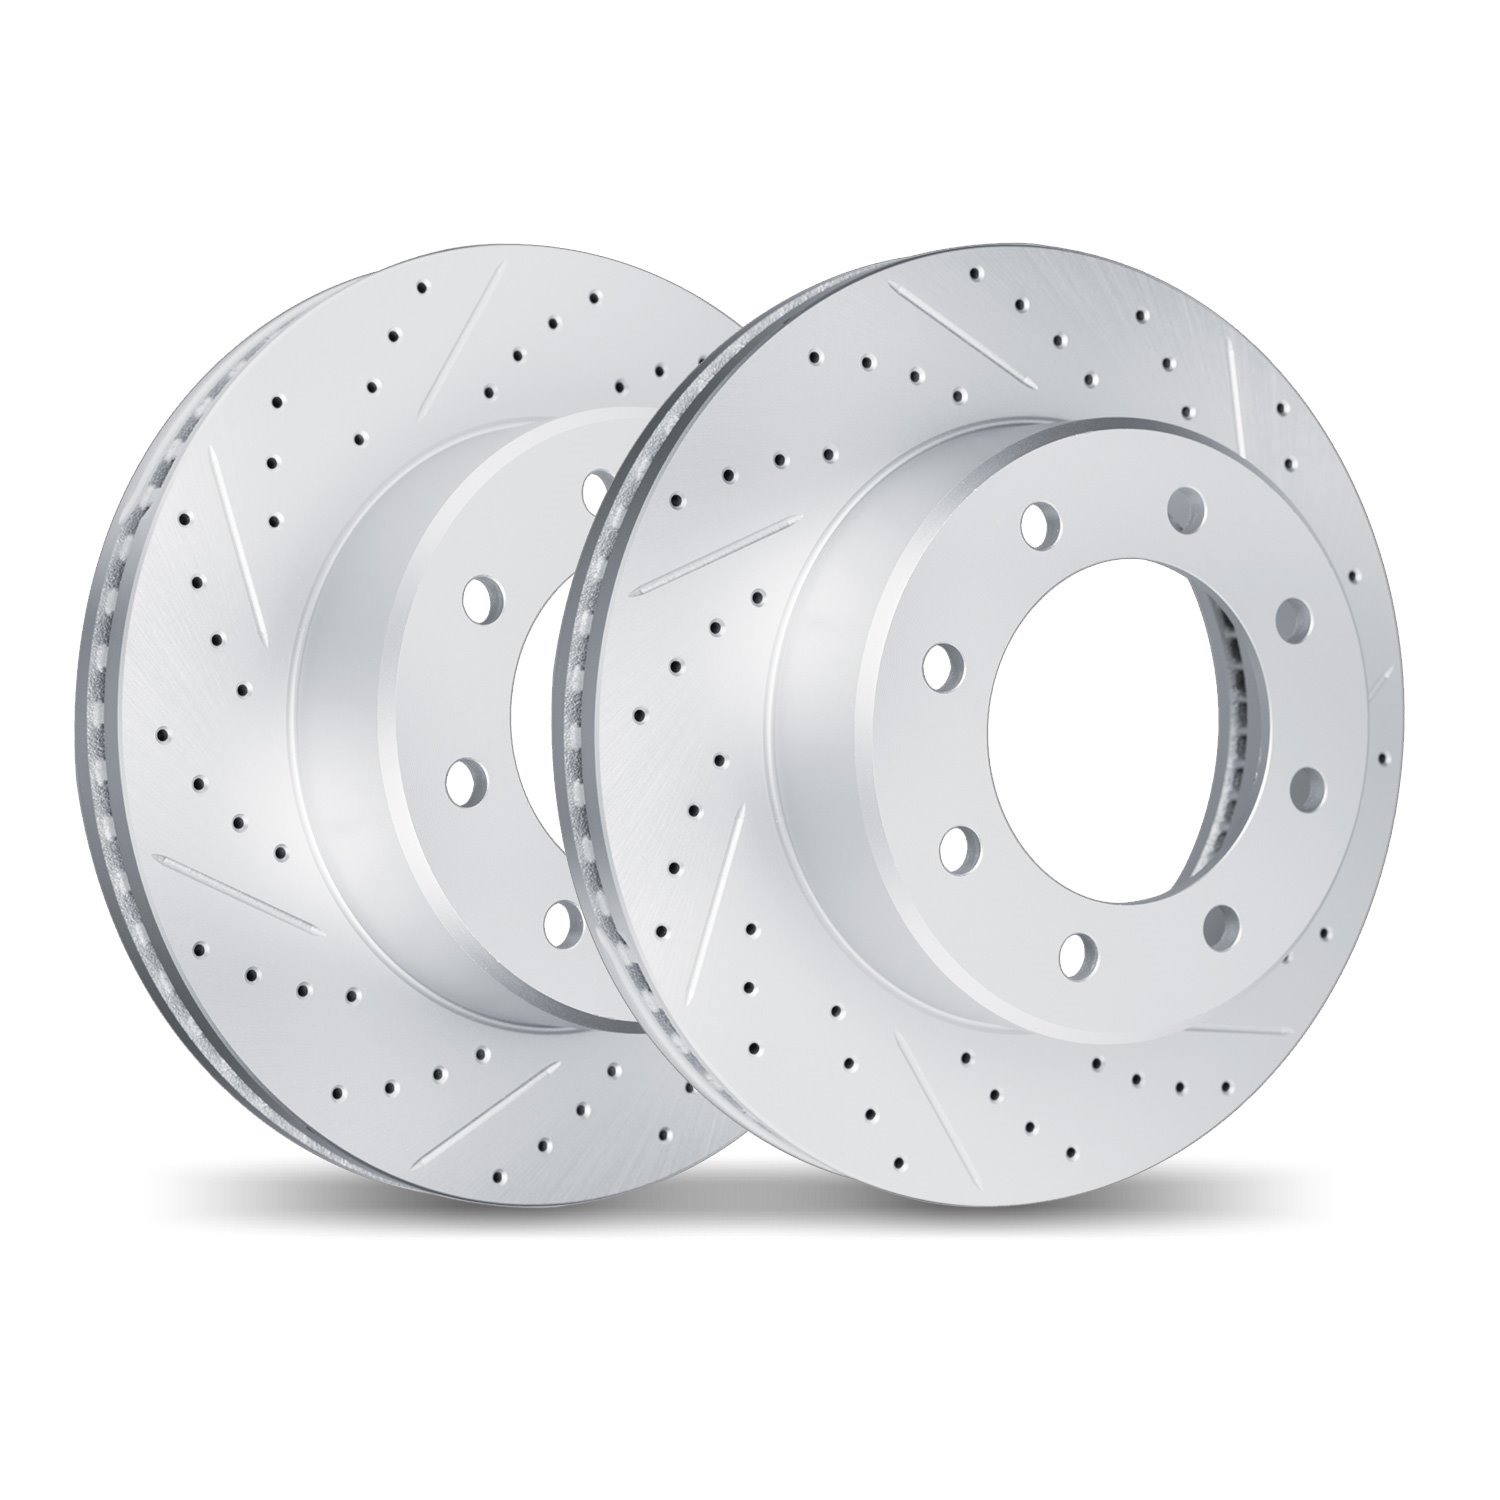 2002-54153 Geoperformance Drilled/Slotted Brake Rotors, 1999-2004 Ford/Lincoln/Mercury/Mazda, Position: Rear